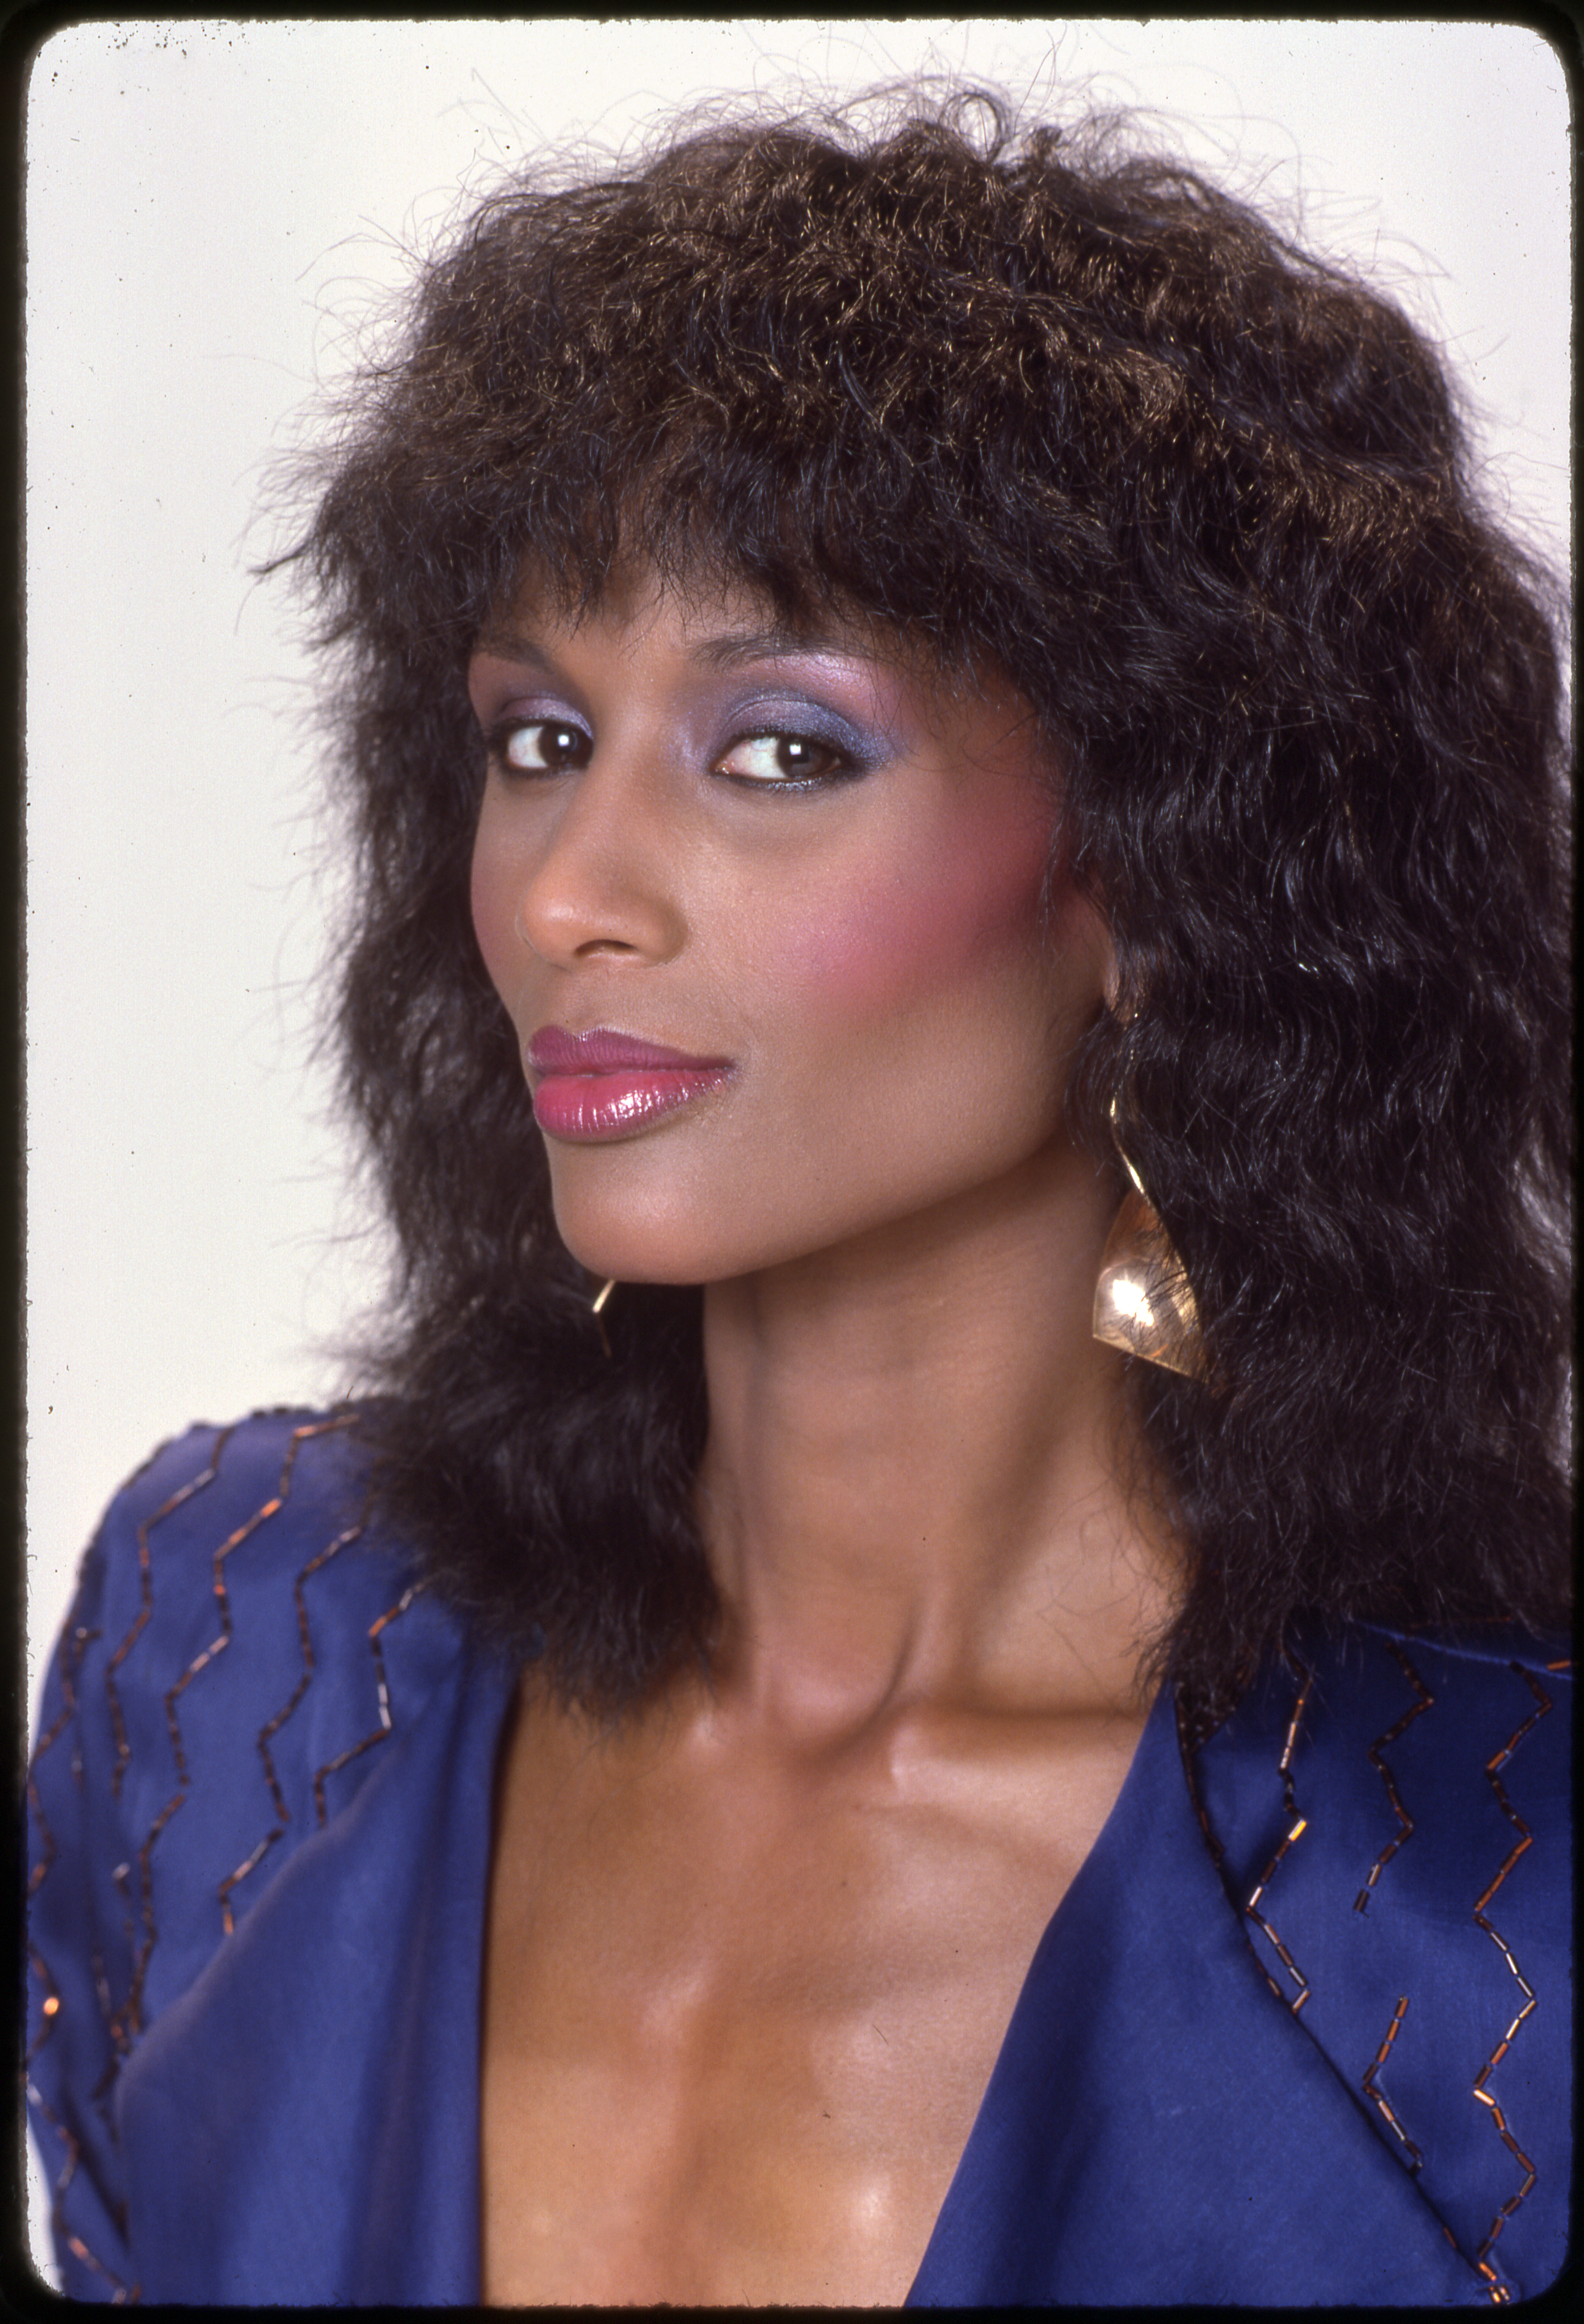 Portrait of American fashion model and actress Beverly Johnson in the 1980s. (Anthony Barboza&amp;mdash;Getty Images)